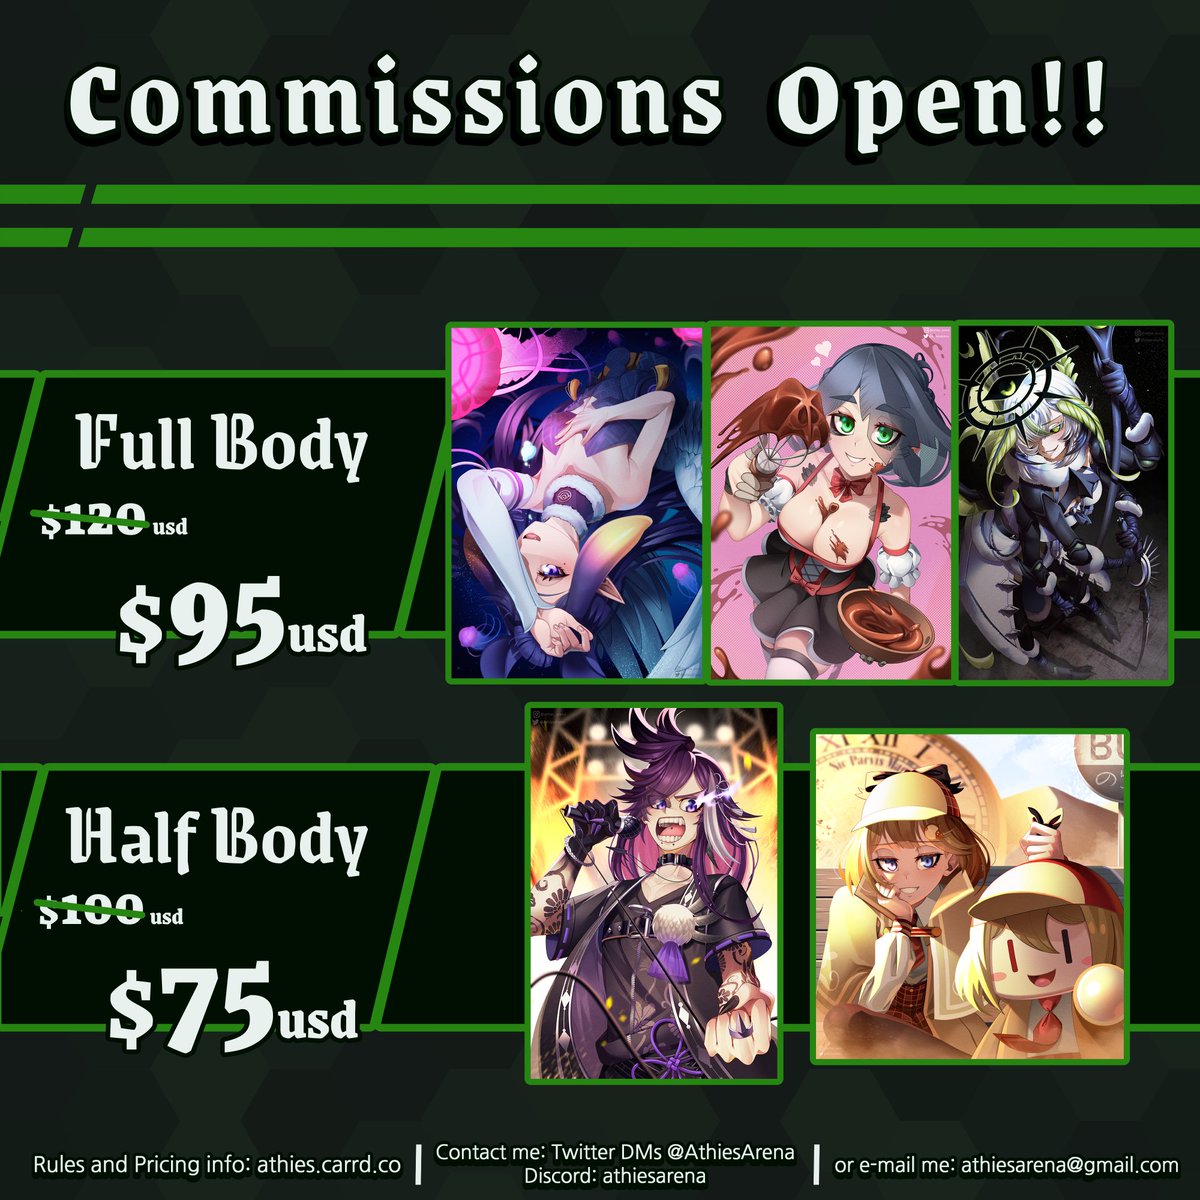 As always, here's your reminder that commissions are open. Movement has been a fair bit slower, so I'm cutting down prices until further notice. If you have any questions or want to order, feel free to message me!